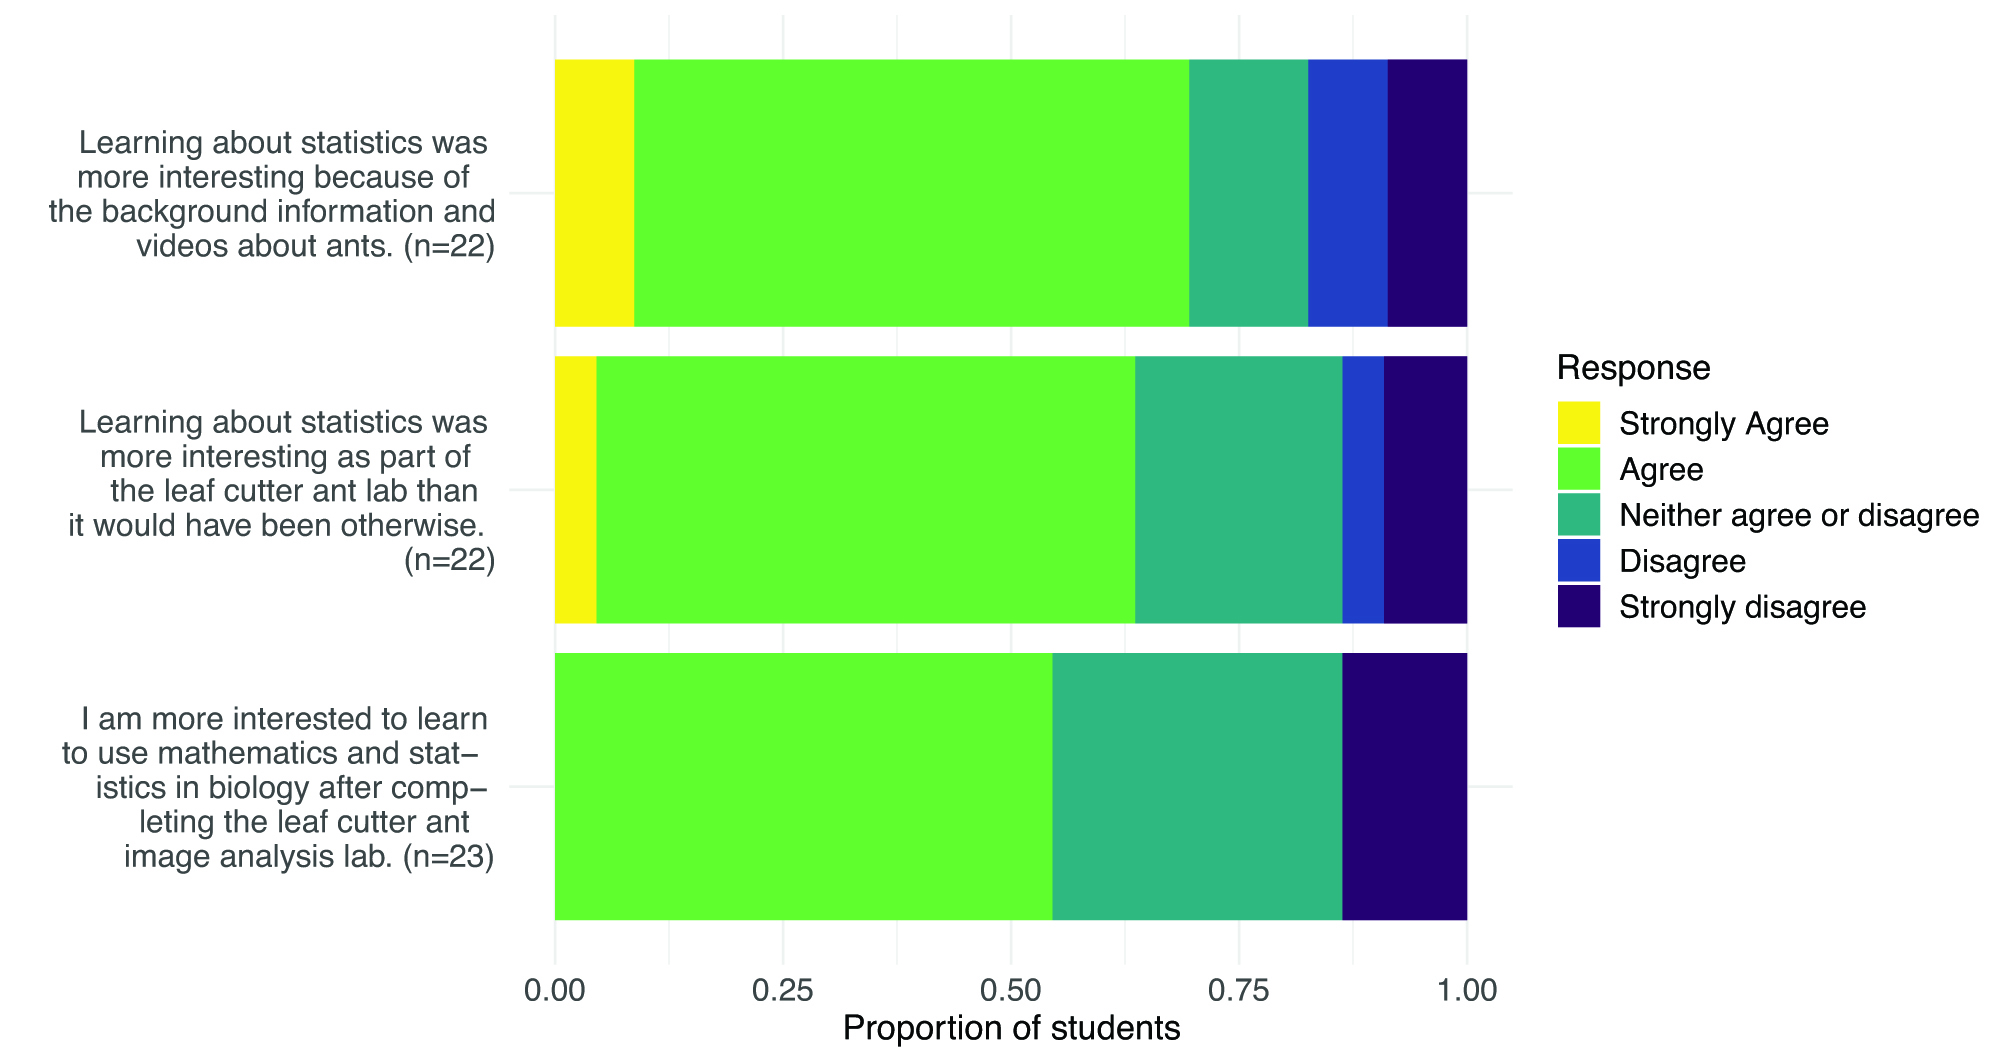 Figure 2. Results from student perception surveys